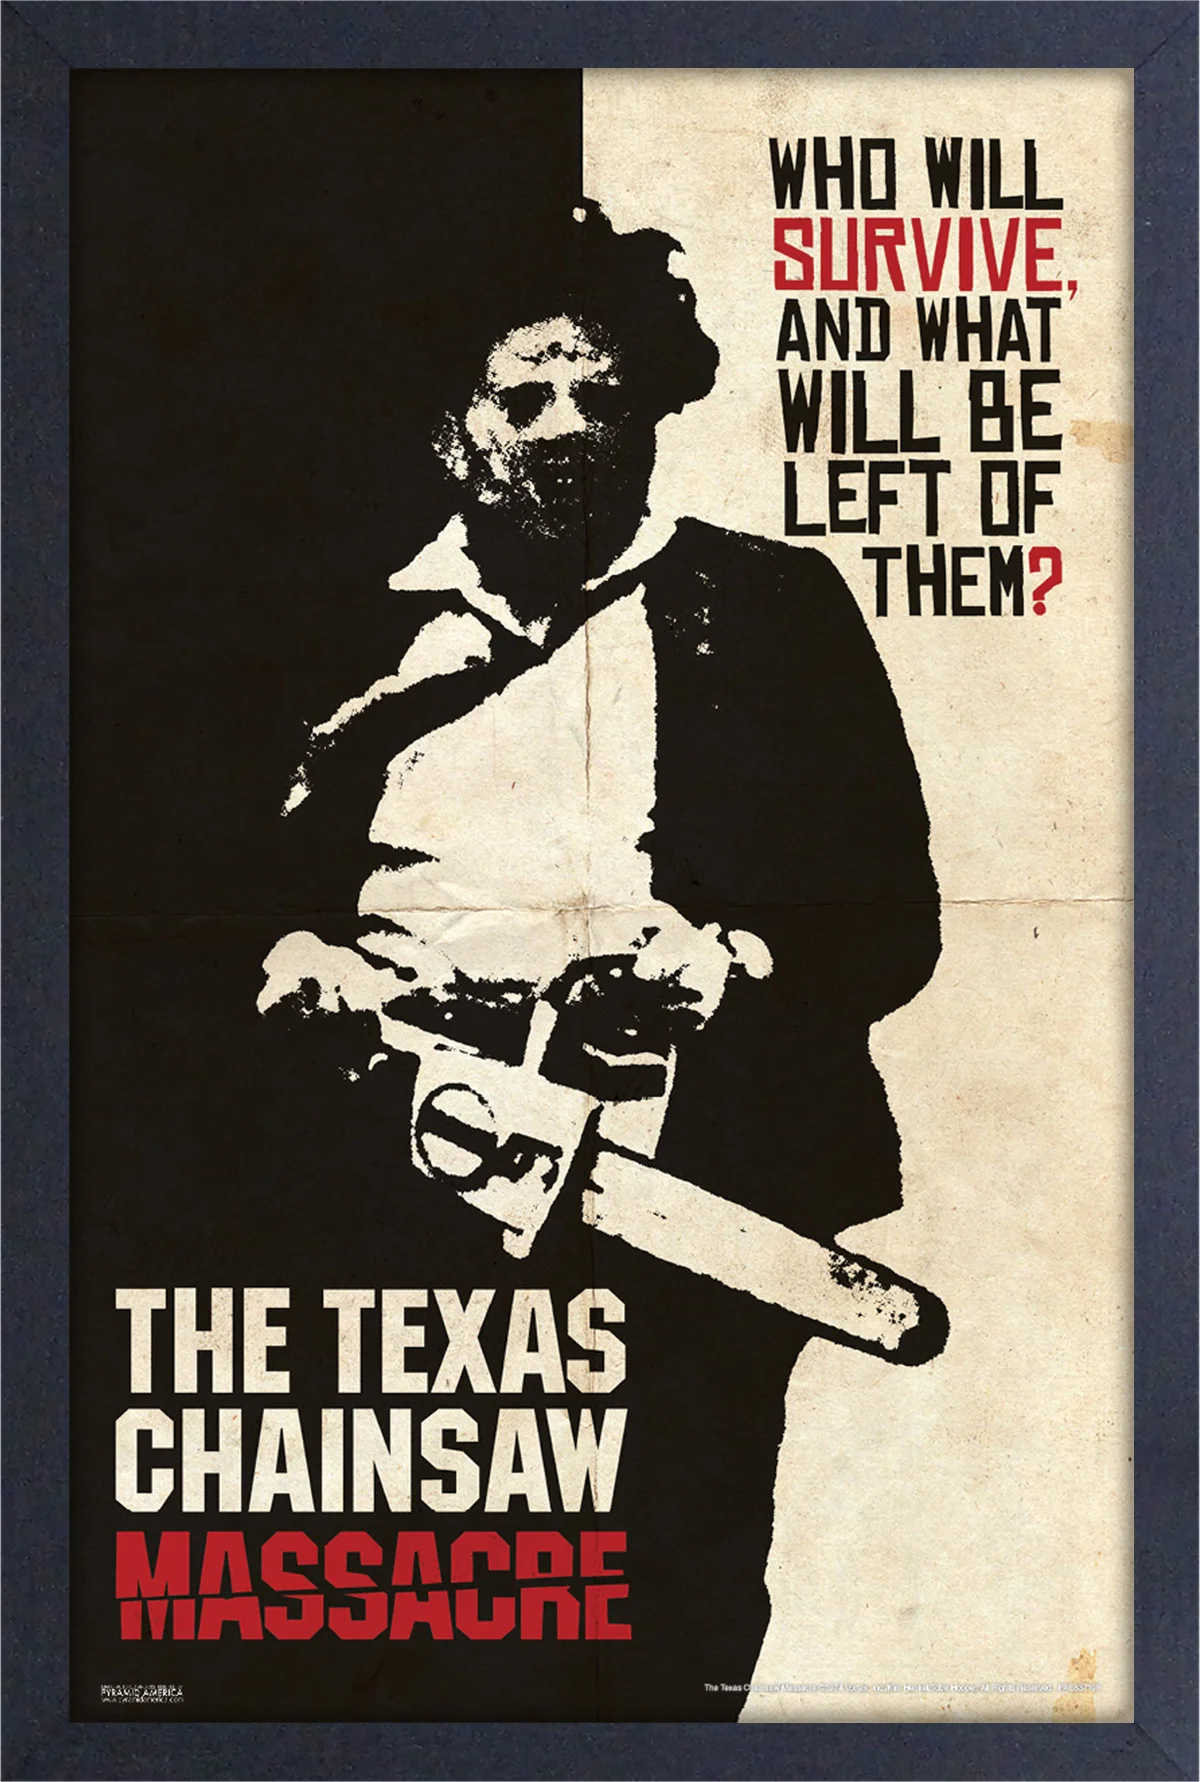 Texas Chainsaw Massacre - Who Will Survive? (11"x17" Gel-Coat) (Order in multiples of 6, mix and match styles)